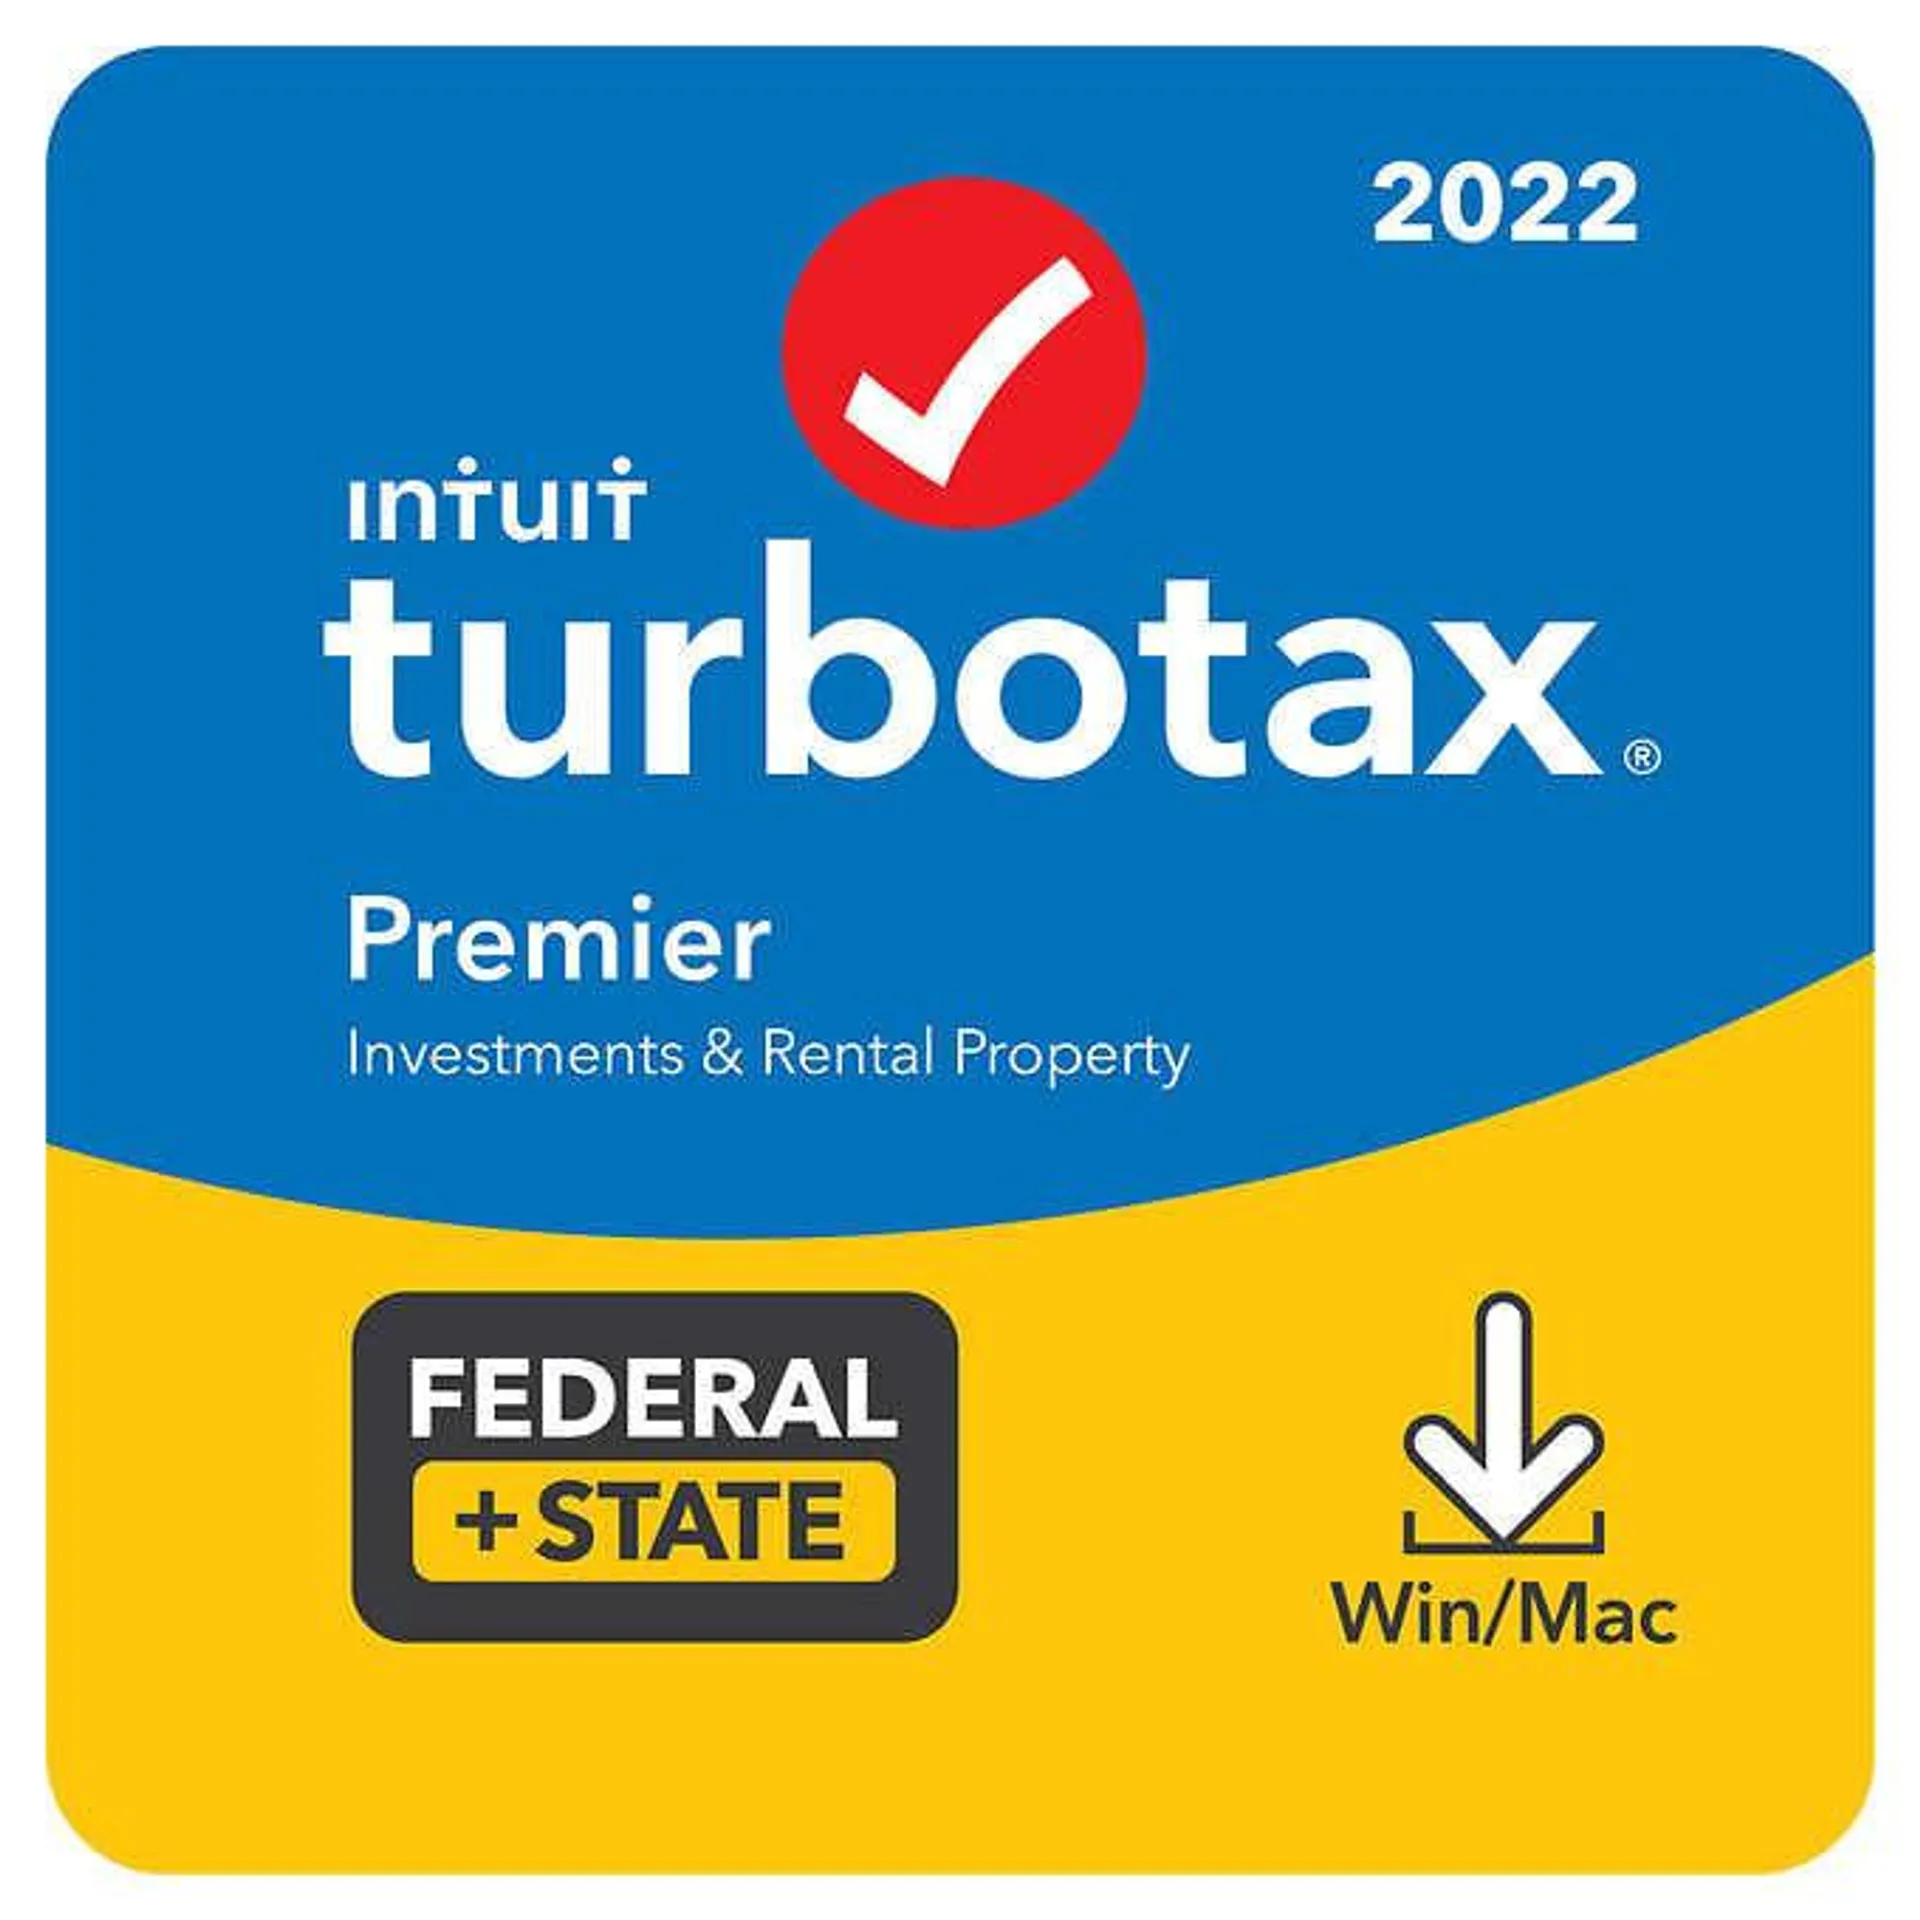 TurboTax Premier 2022 Federal E-File + State Download, for PC/Mac, Includes $10 Credit in Product*